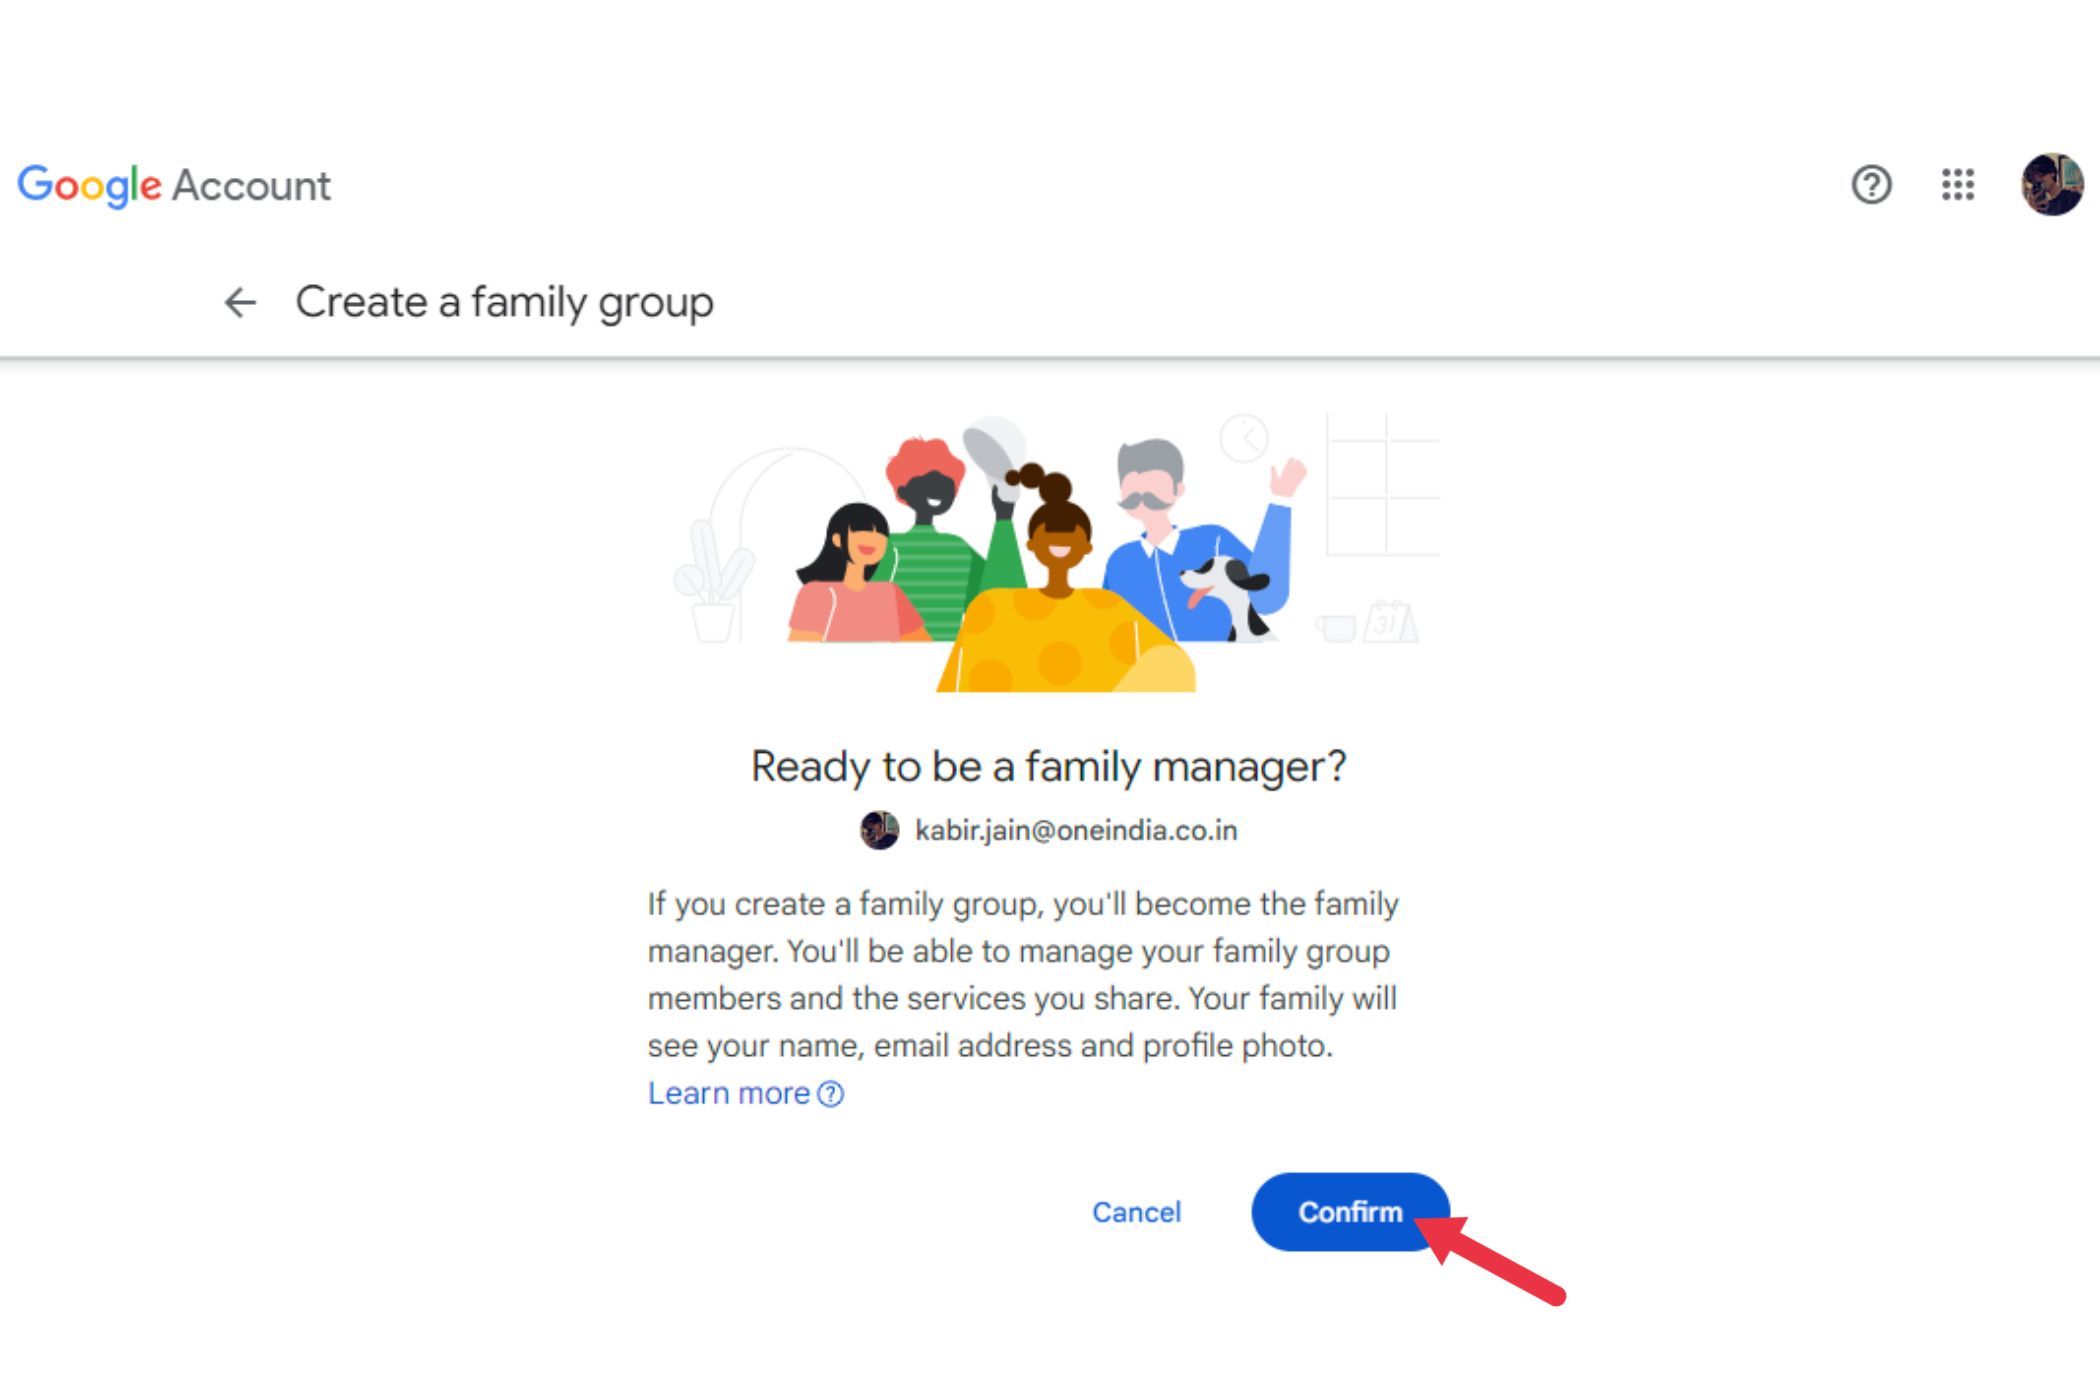 Click the Confirm button to confirm your status as a family manager.